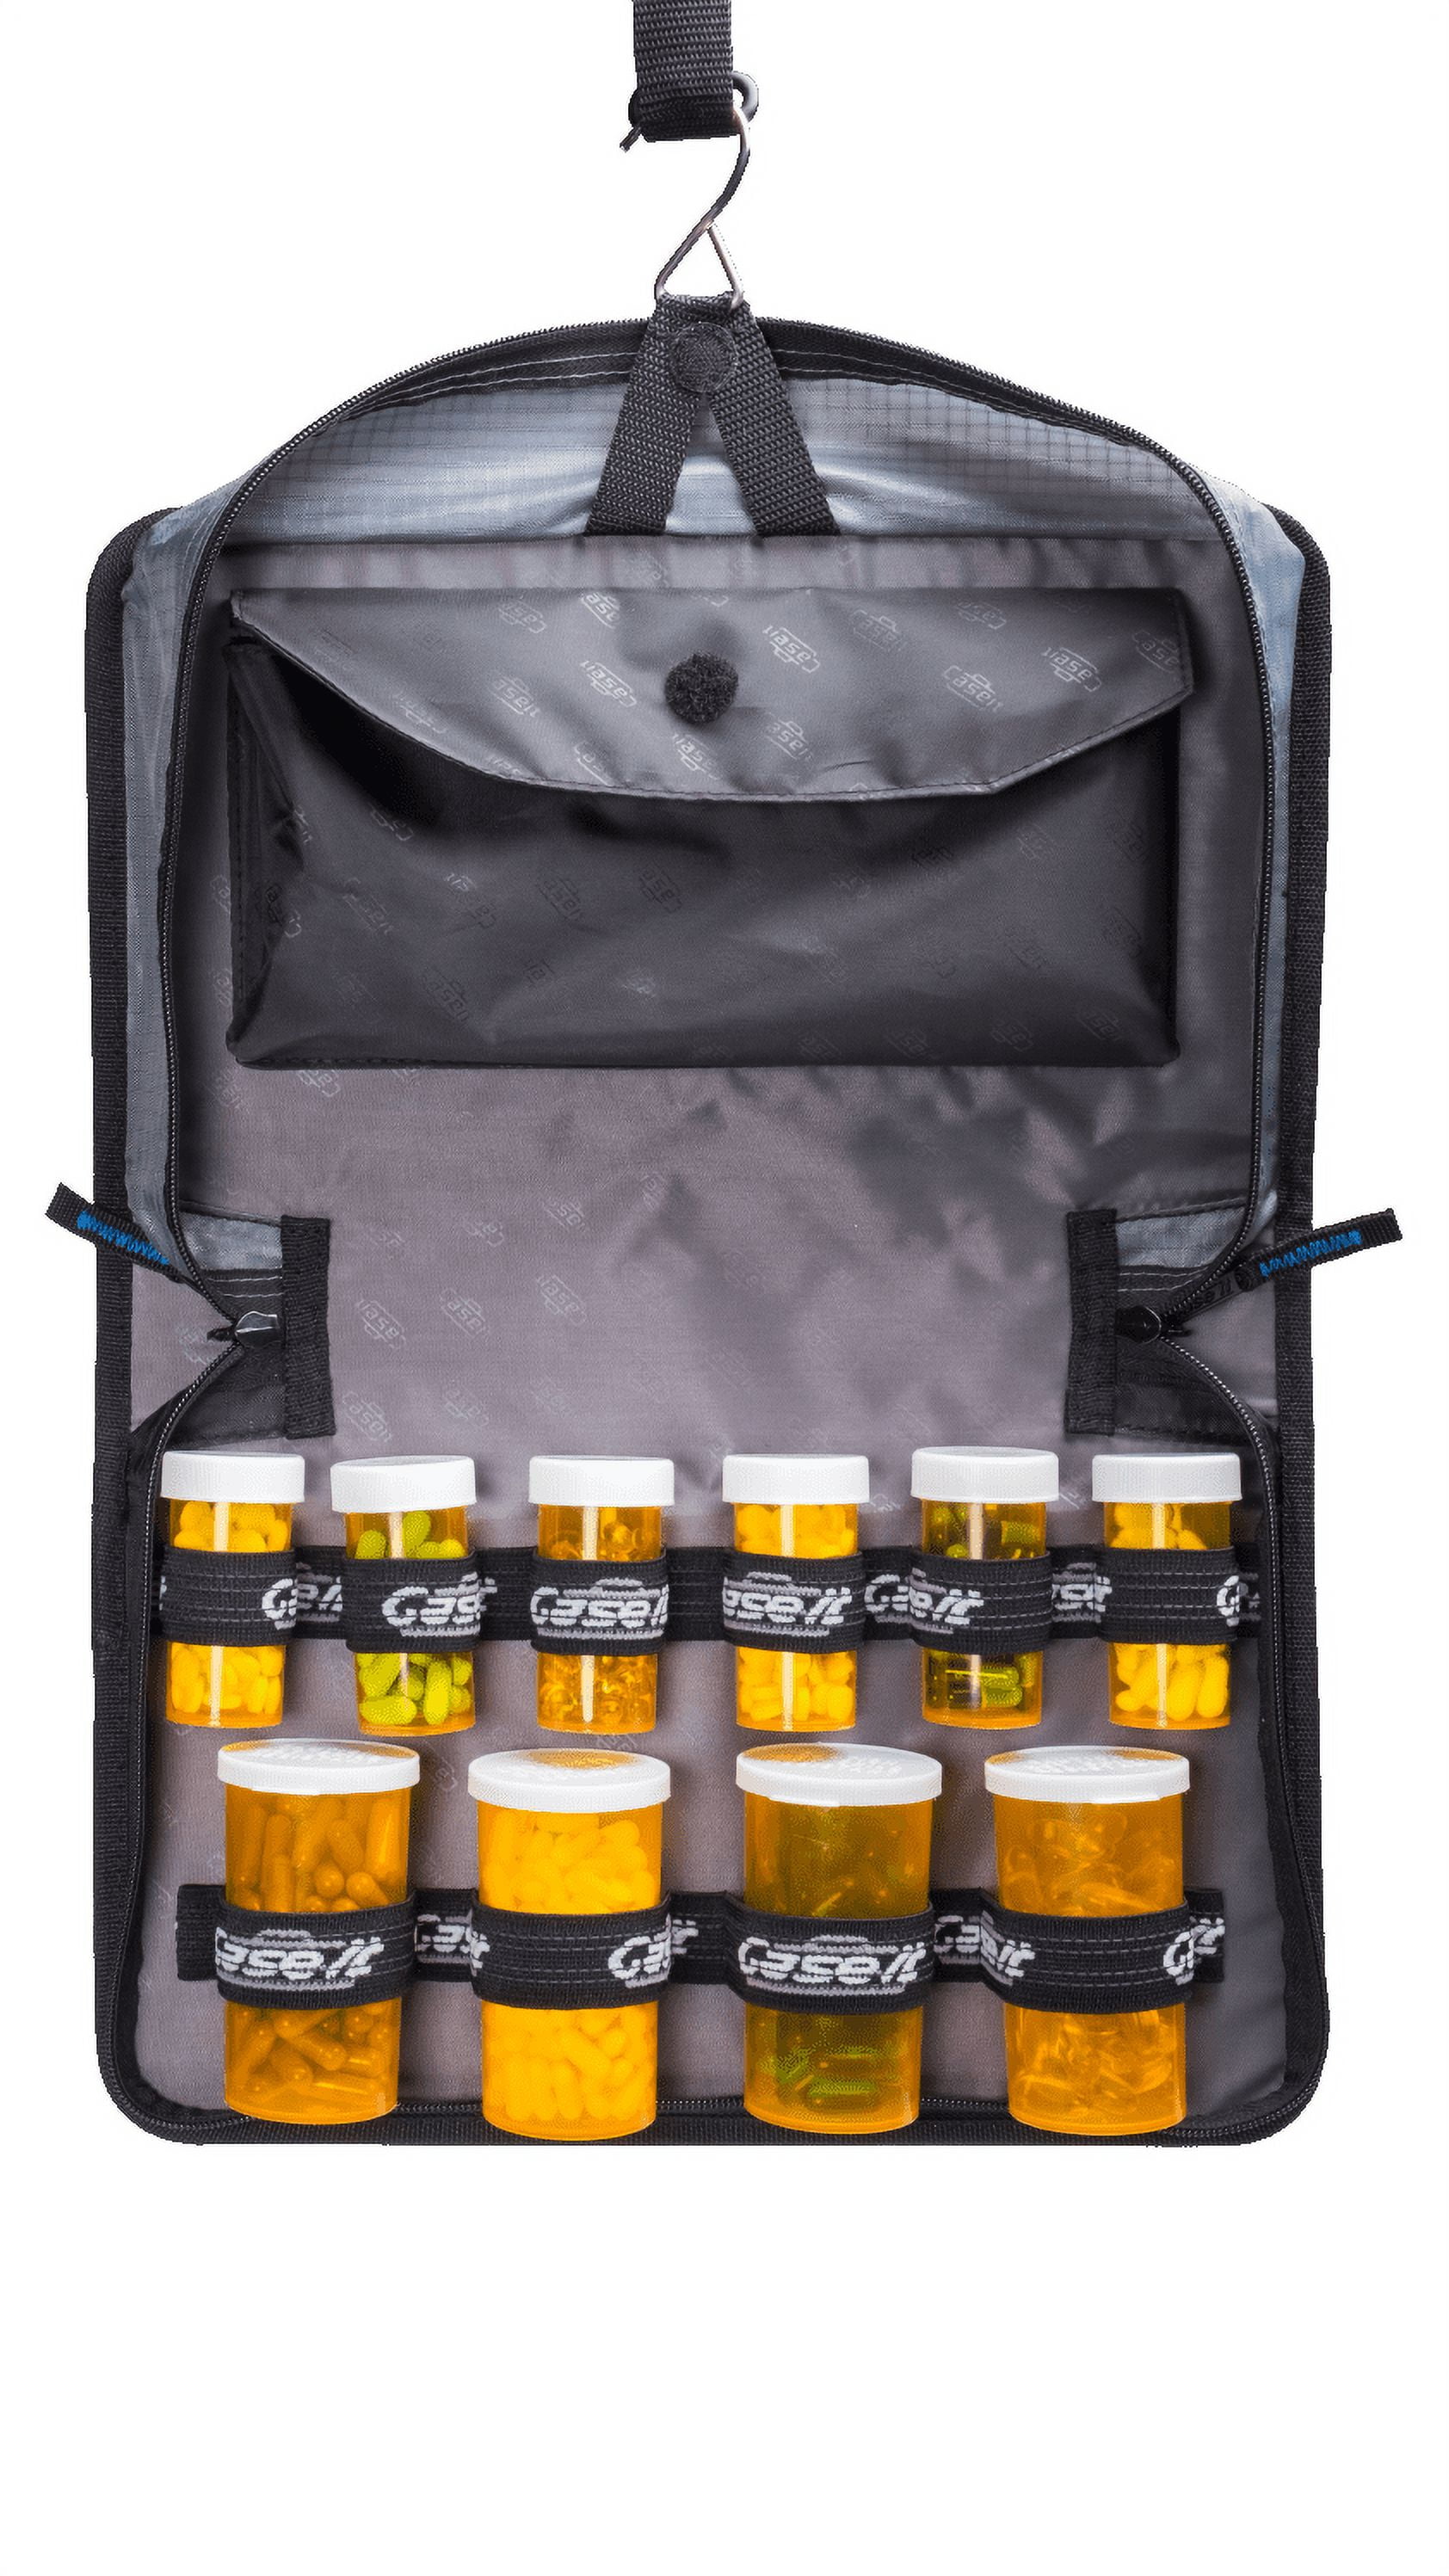 Med Manager XL Medicine Organizer and Pill Case, Holds (25) Pill Bottles -  (17) Standard Size and (8) Large Bottles, Black, 13 inches x 13 inches x  4.5 inches 